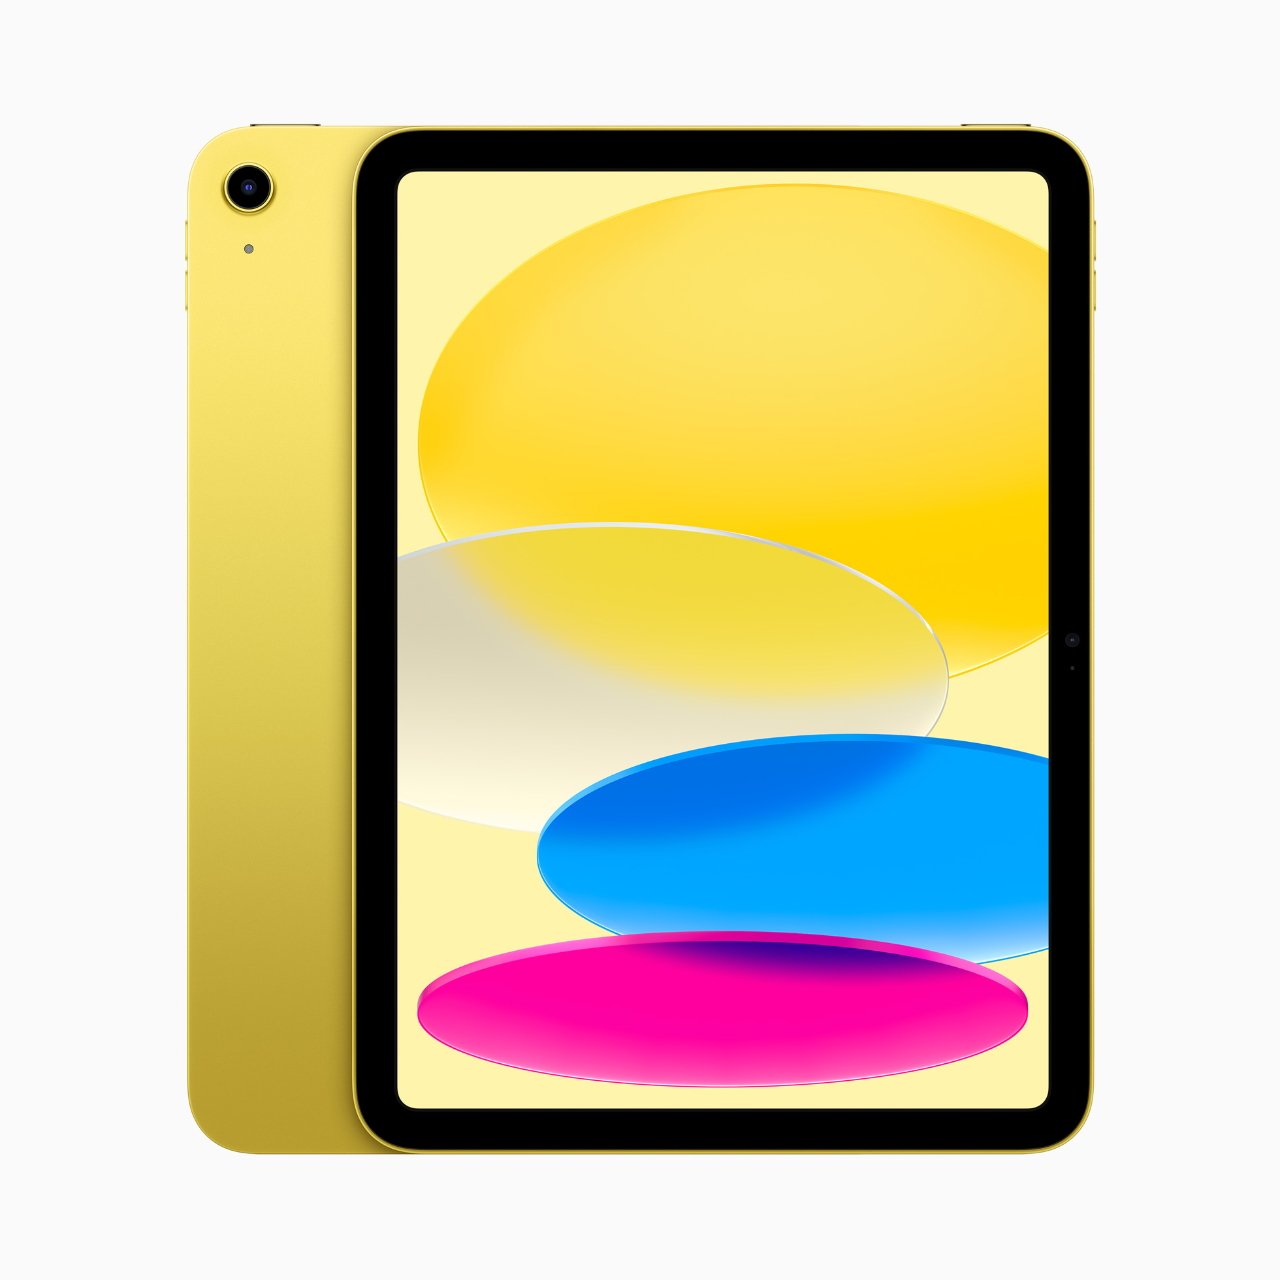 The new iPad can be bought in yellow. It's very yellow.